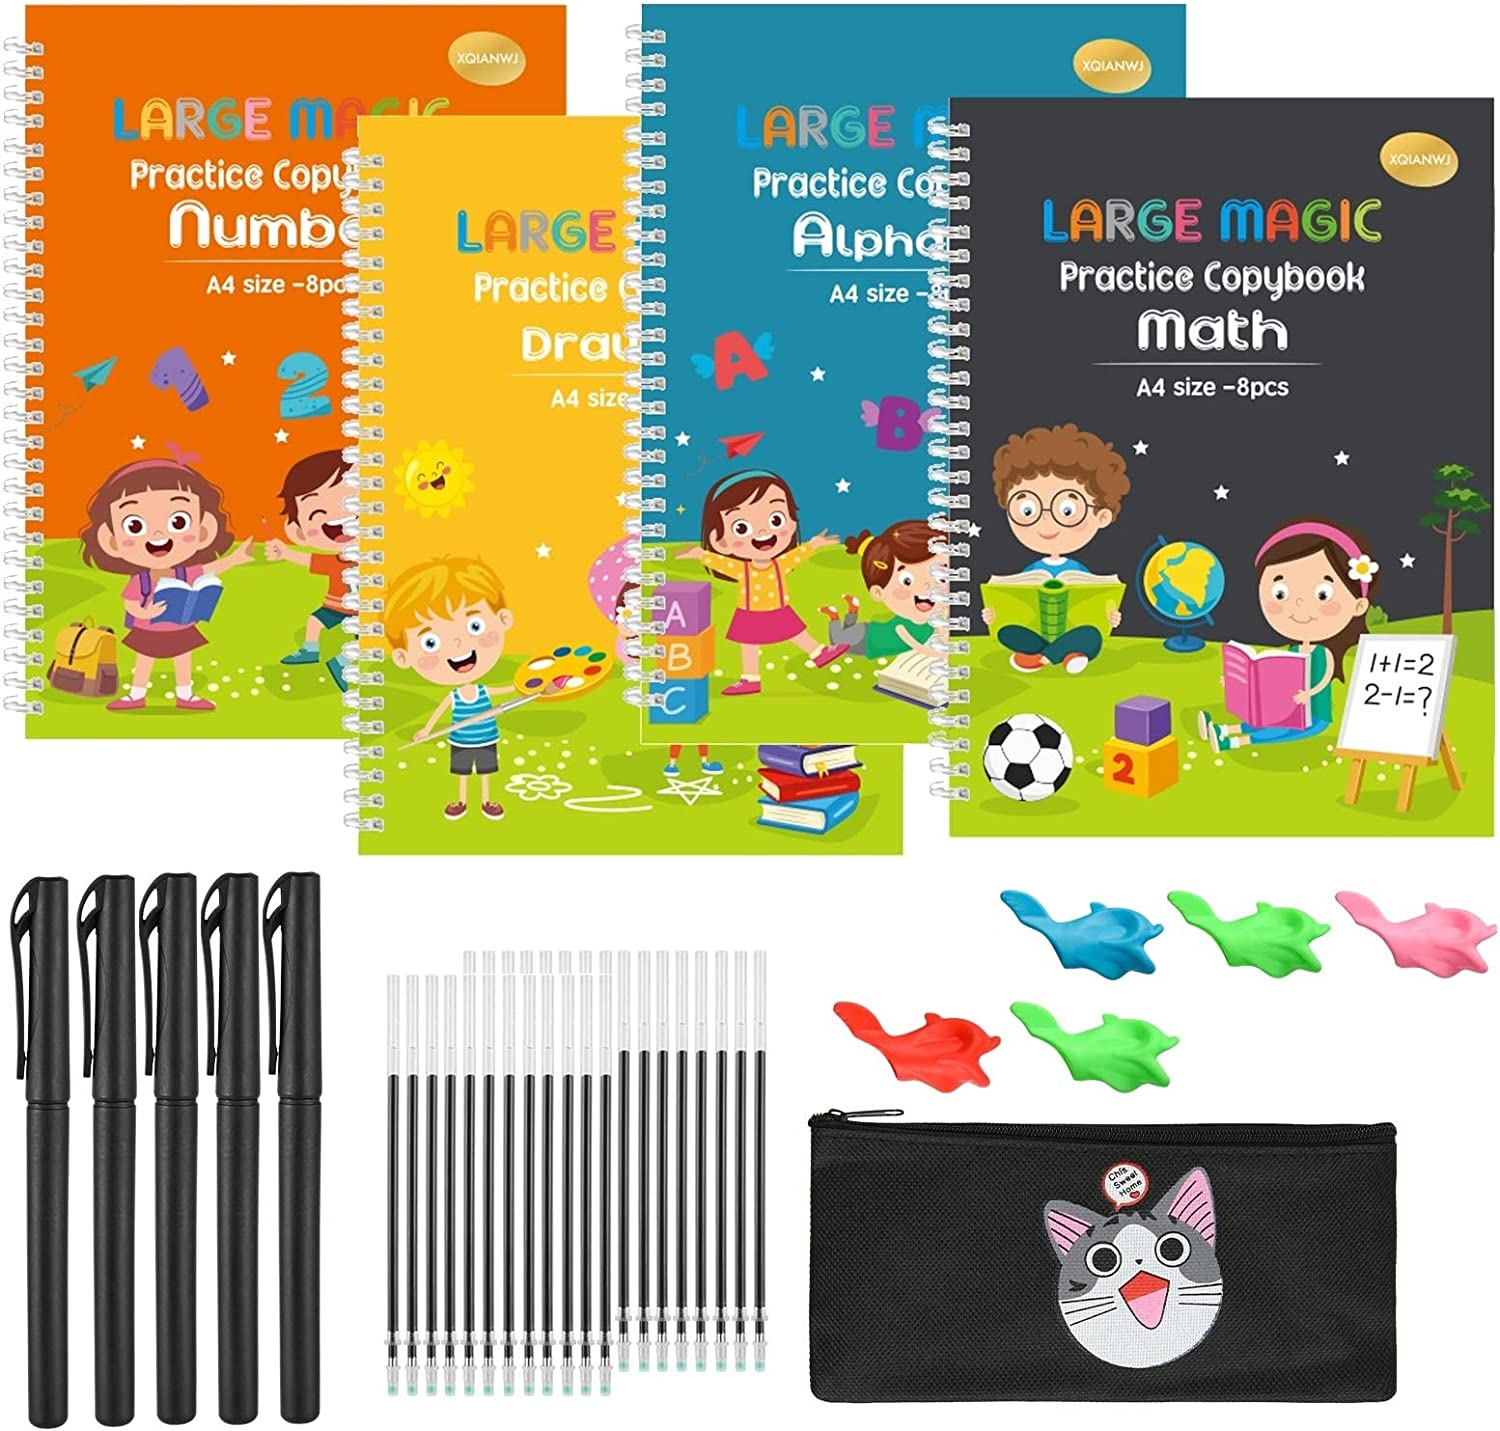 A4 Size Reusable Handwriting Practice Book for Kids,3D Grooves Magic Practice Copybook for Preschoolers,Large English Calligraphy Copybook with 4Books,5Pens,30Refills,5Holders,1Pen Bag